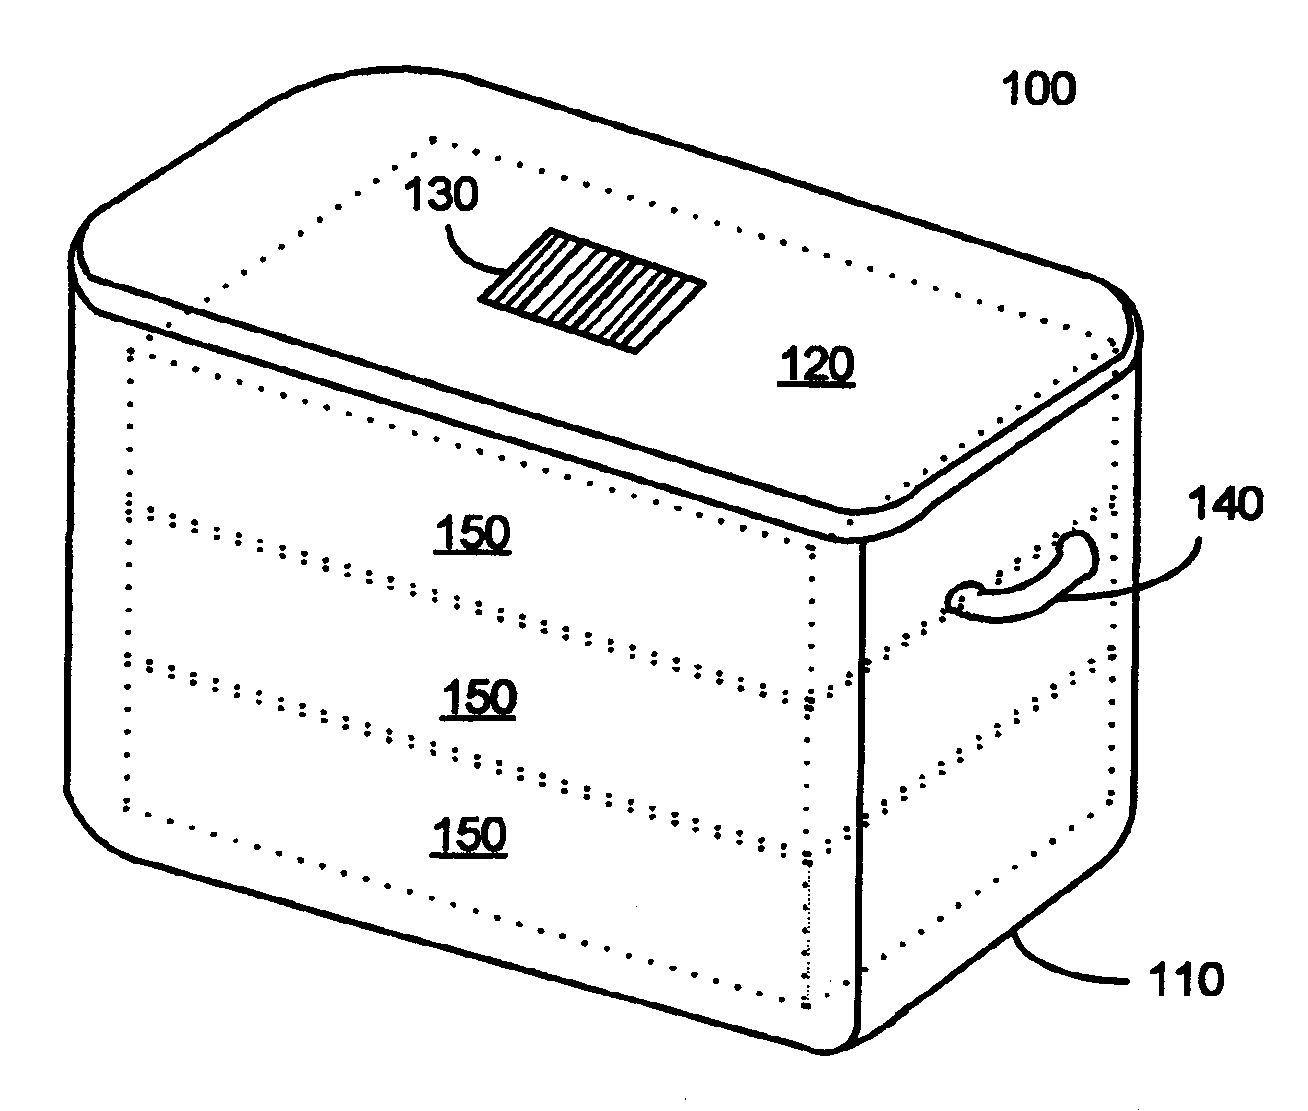 Control system for an rfid-based system for assembling and verifying outbound surgical equipment corresponding to a particular surgery